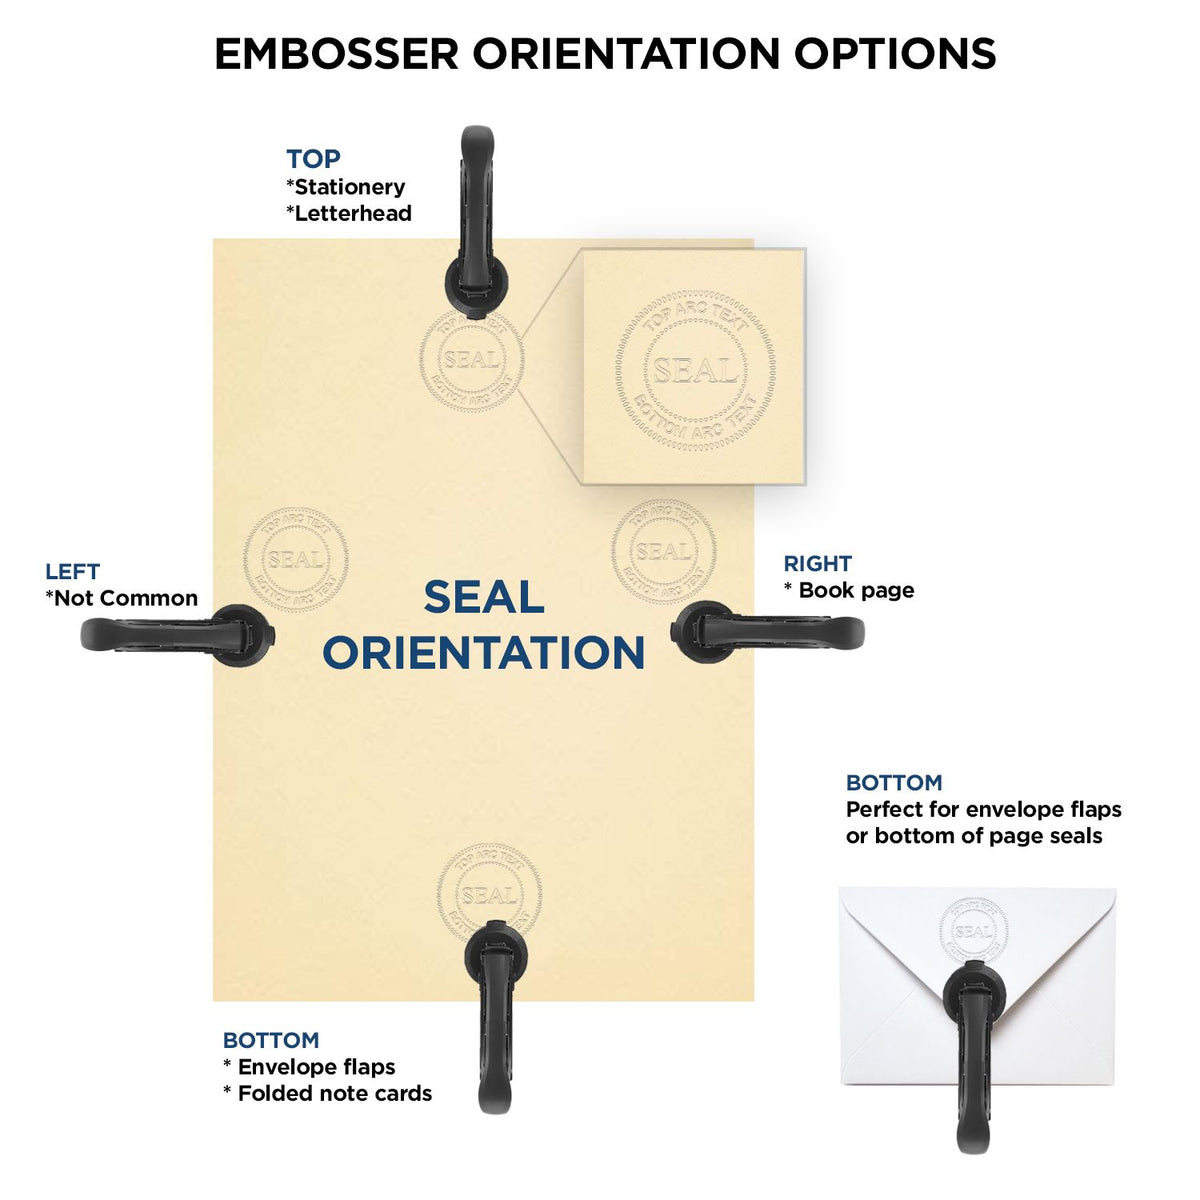 An infographic for the Louisiana Geologist Desk Seal showing embosser orientation, this is showing examples of a top, bottom, right and left insert.